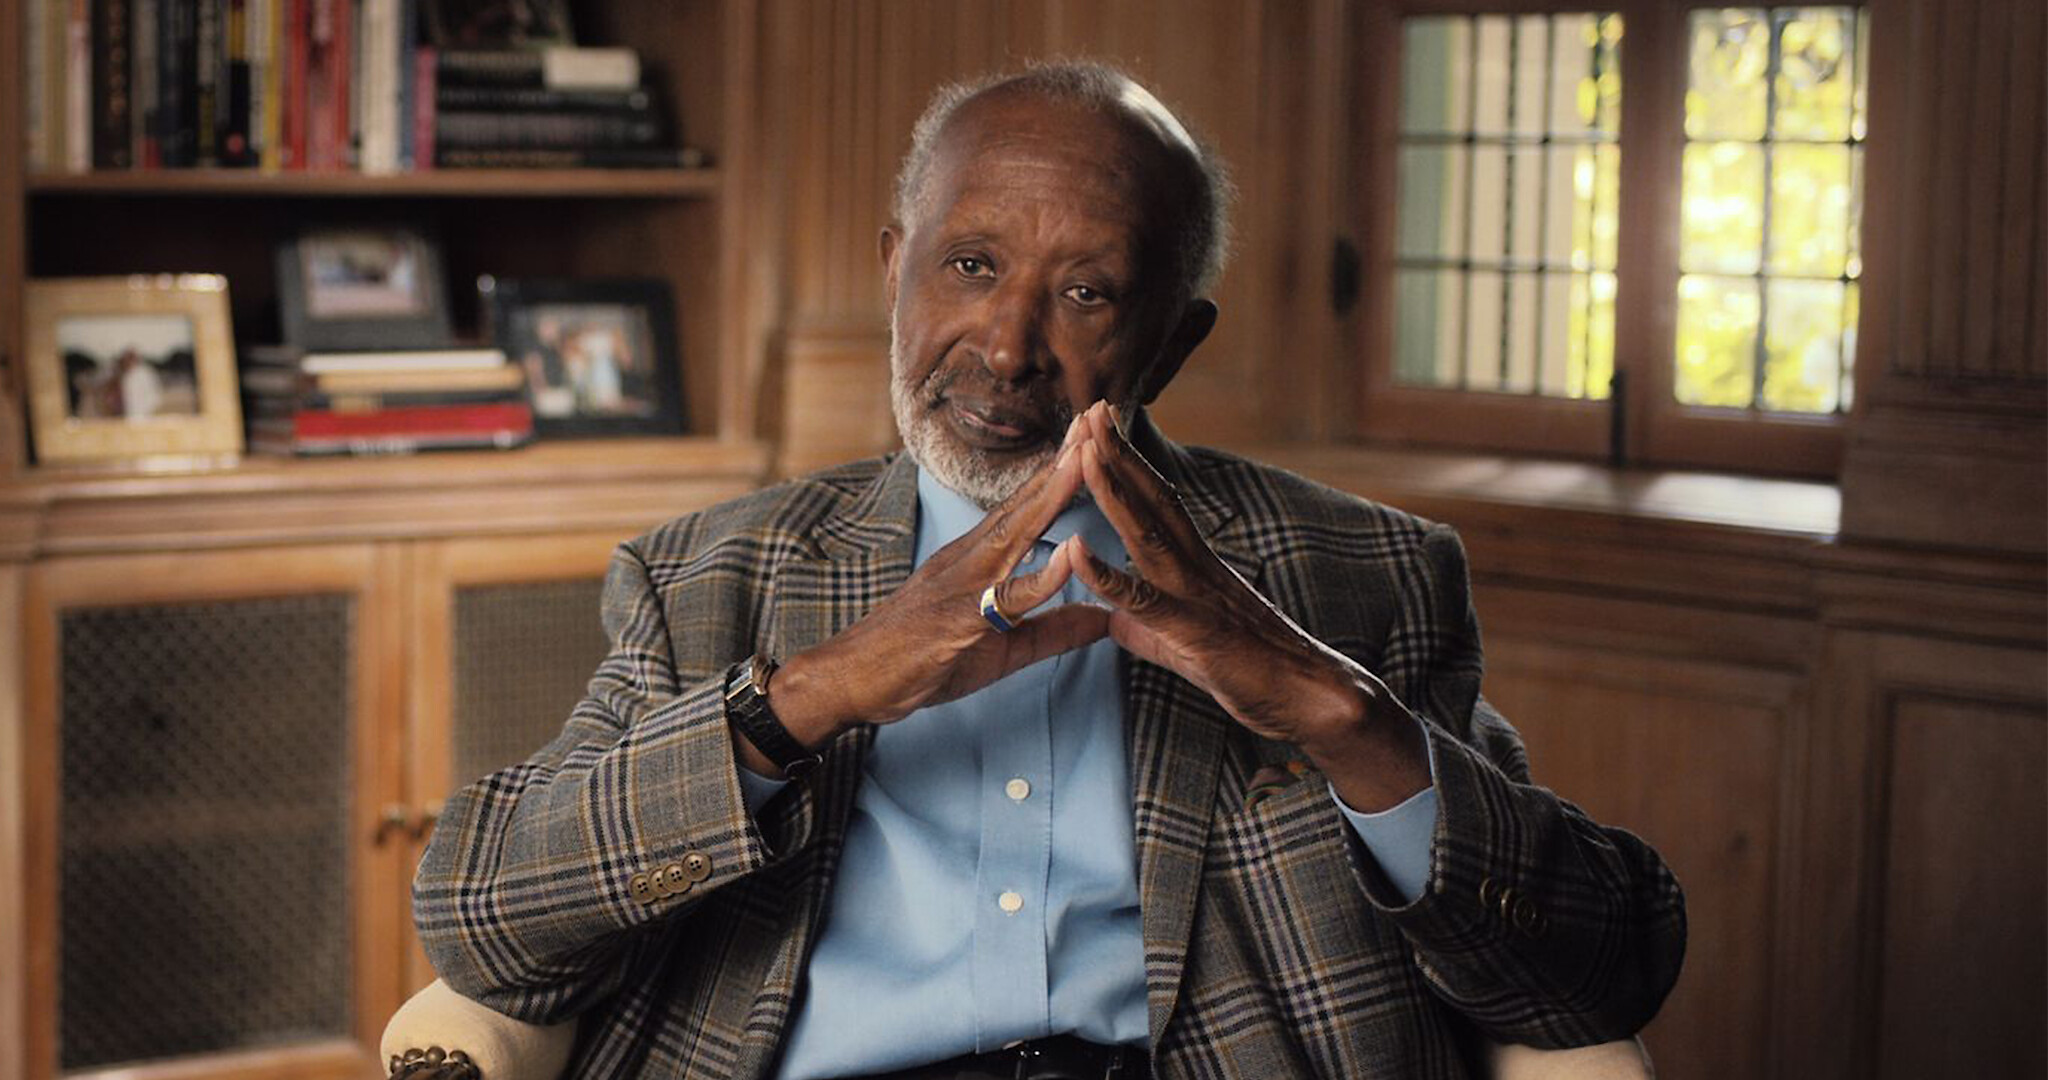 Who Is Clarence Avant? The Black Godfather Celebrates the Life of the Most Connected Man in Culture